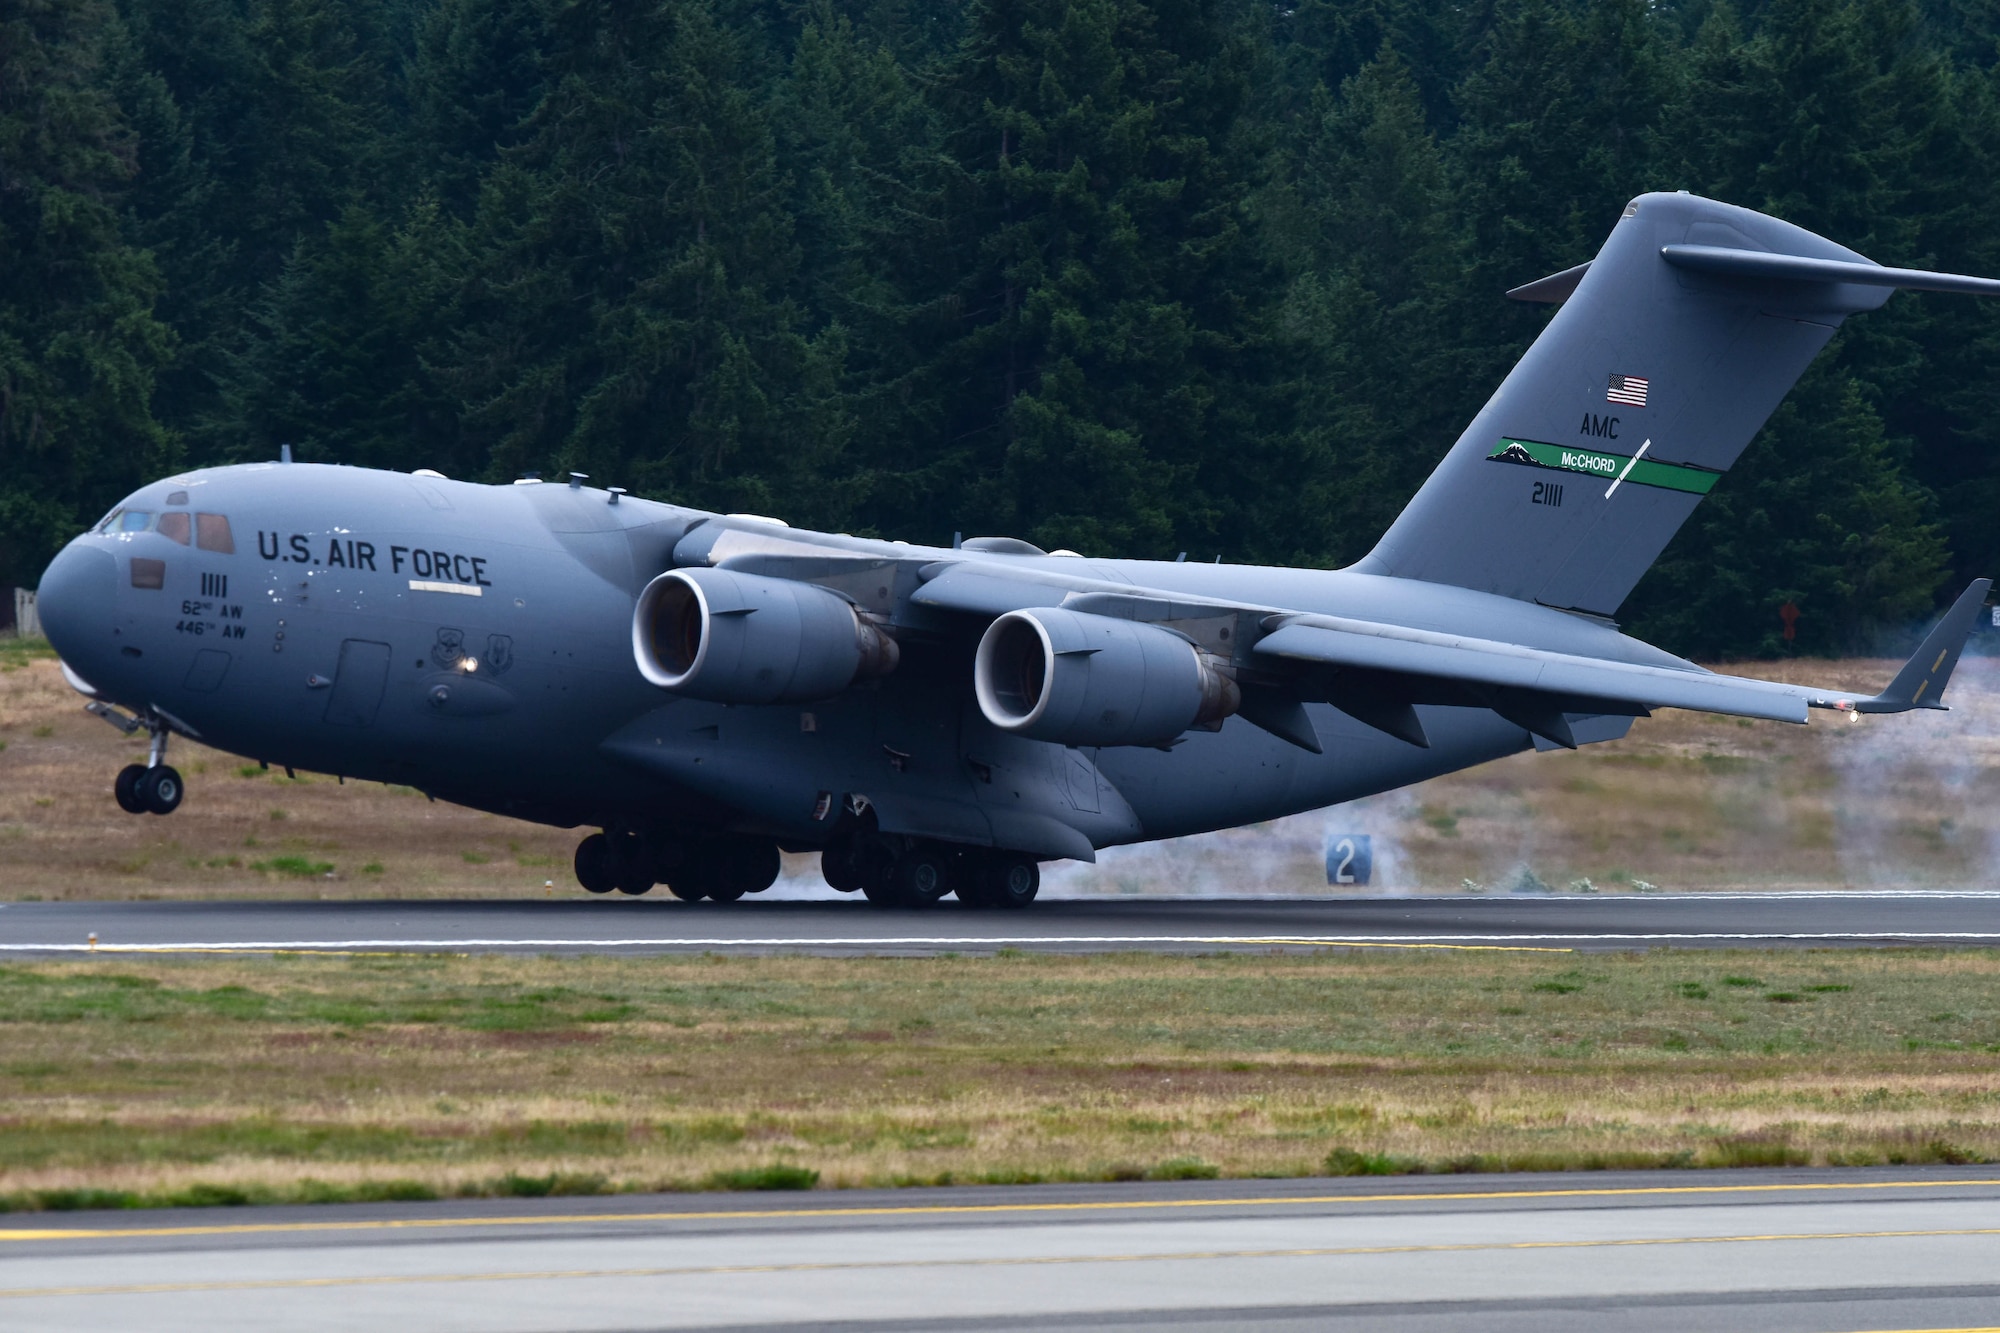 The first aircraft lands on the newly resurfaced runway at McChord Field, June 17, 2019, at Joint Base Lewis-McChord. McChord Field aircraft and Airmen continued operations at other west coast bases while the runway was resurfaced.  (U.S. Air Force photo by Airman 1st Class Sara Hoerichs)